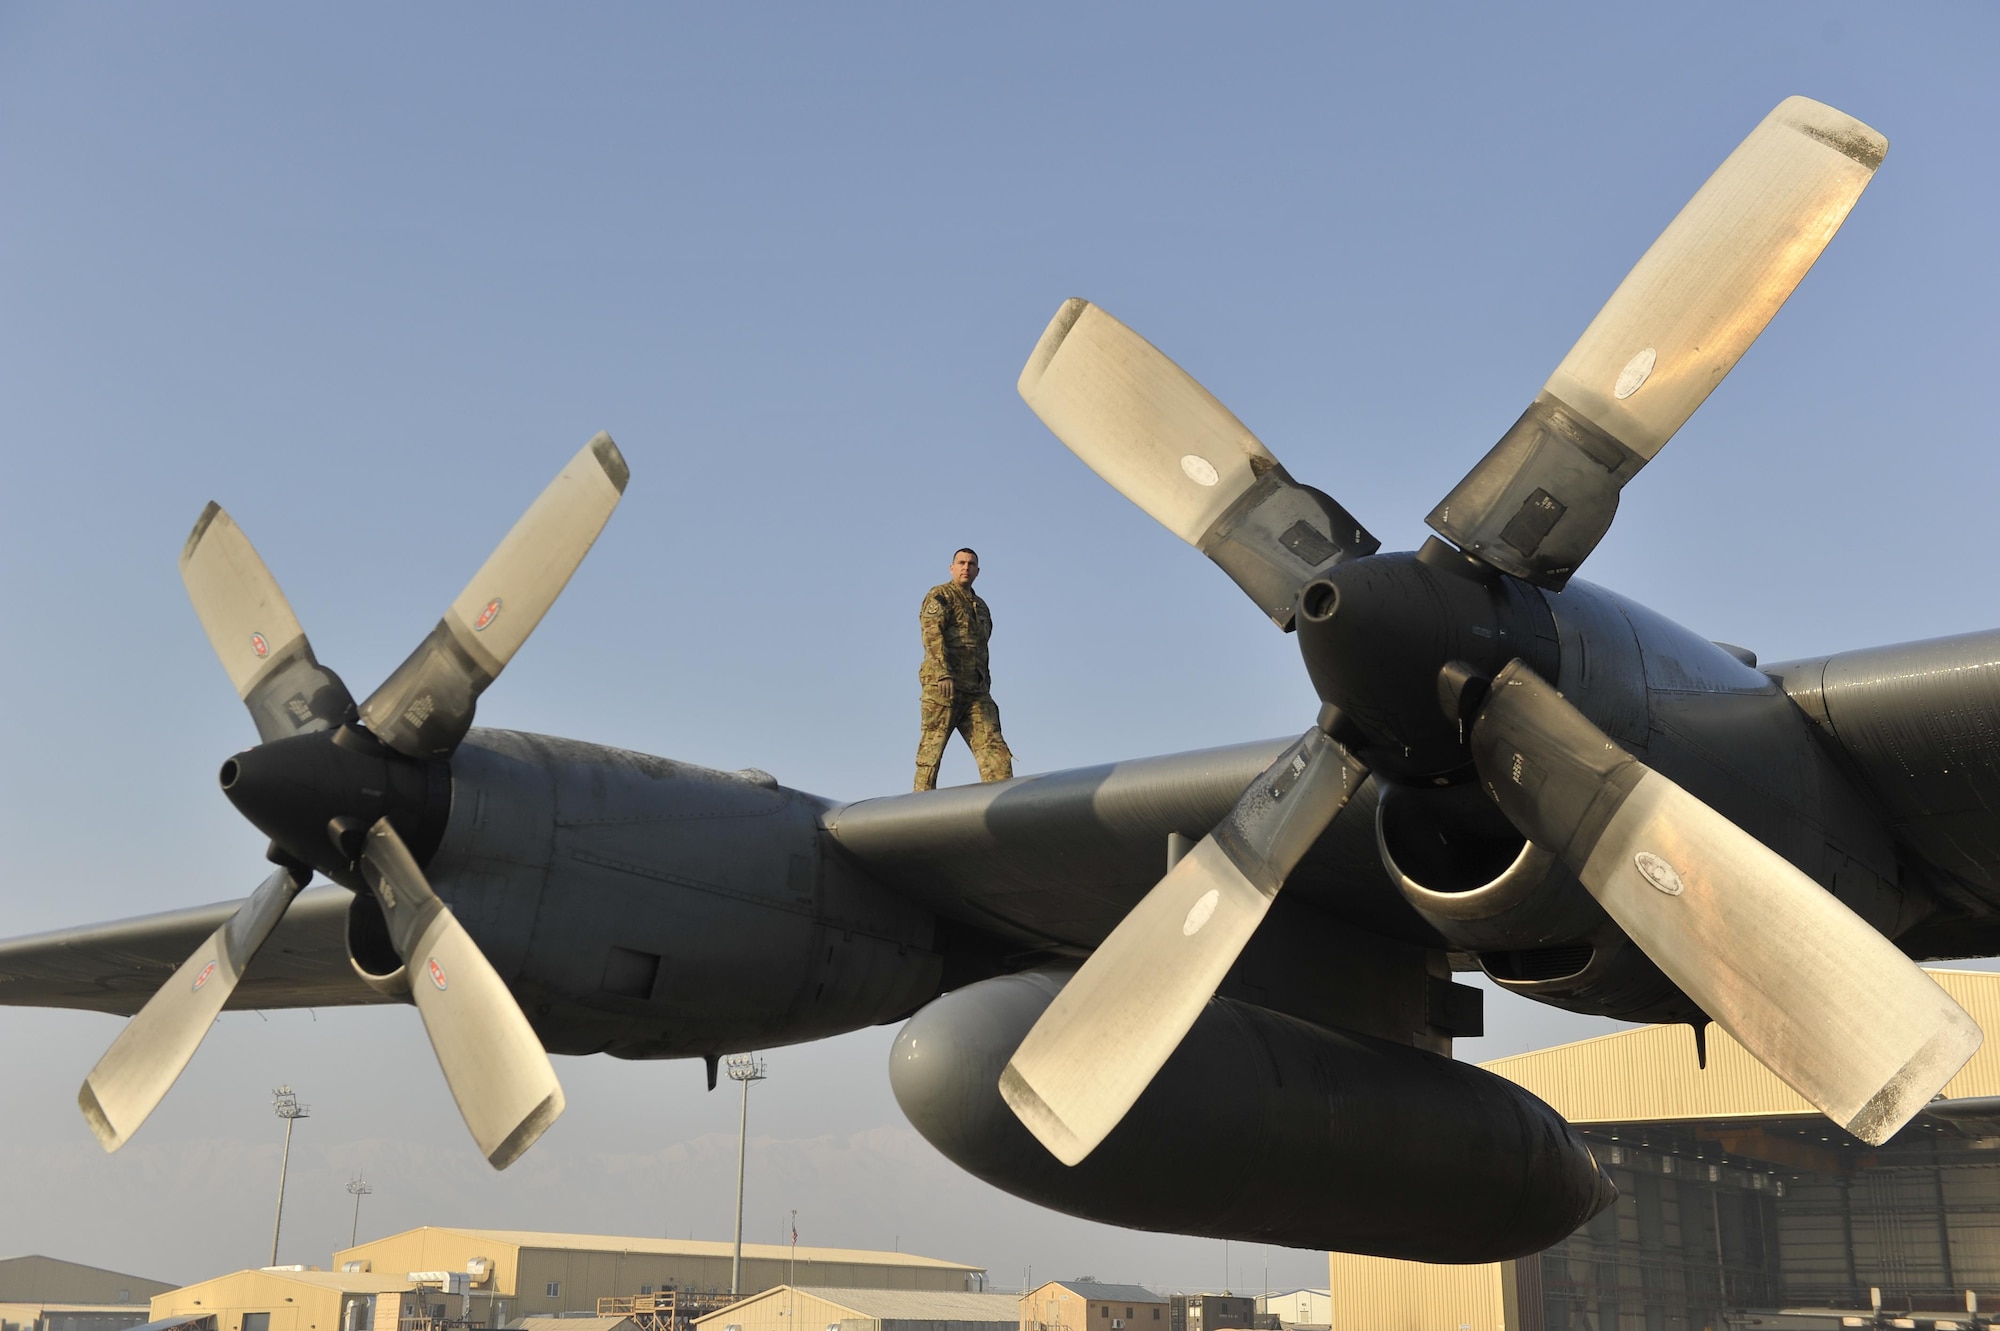 Staff Sgt. David Billings does an inspection of the wings of a C-130H Hercules Jan. 9, 2013, before his flight out of Bagram Airfield, Afghanistan. Billings was on the first of the C-130H model aircraft to permanently relocate out of Bagram to make room for the newer C-130J model aircraft. Billings is a C-130 flight engineer. (U.S. Air Force photo/Senior Master Sgt. Gary J. Rihn)